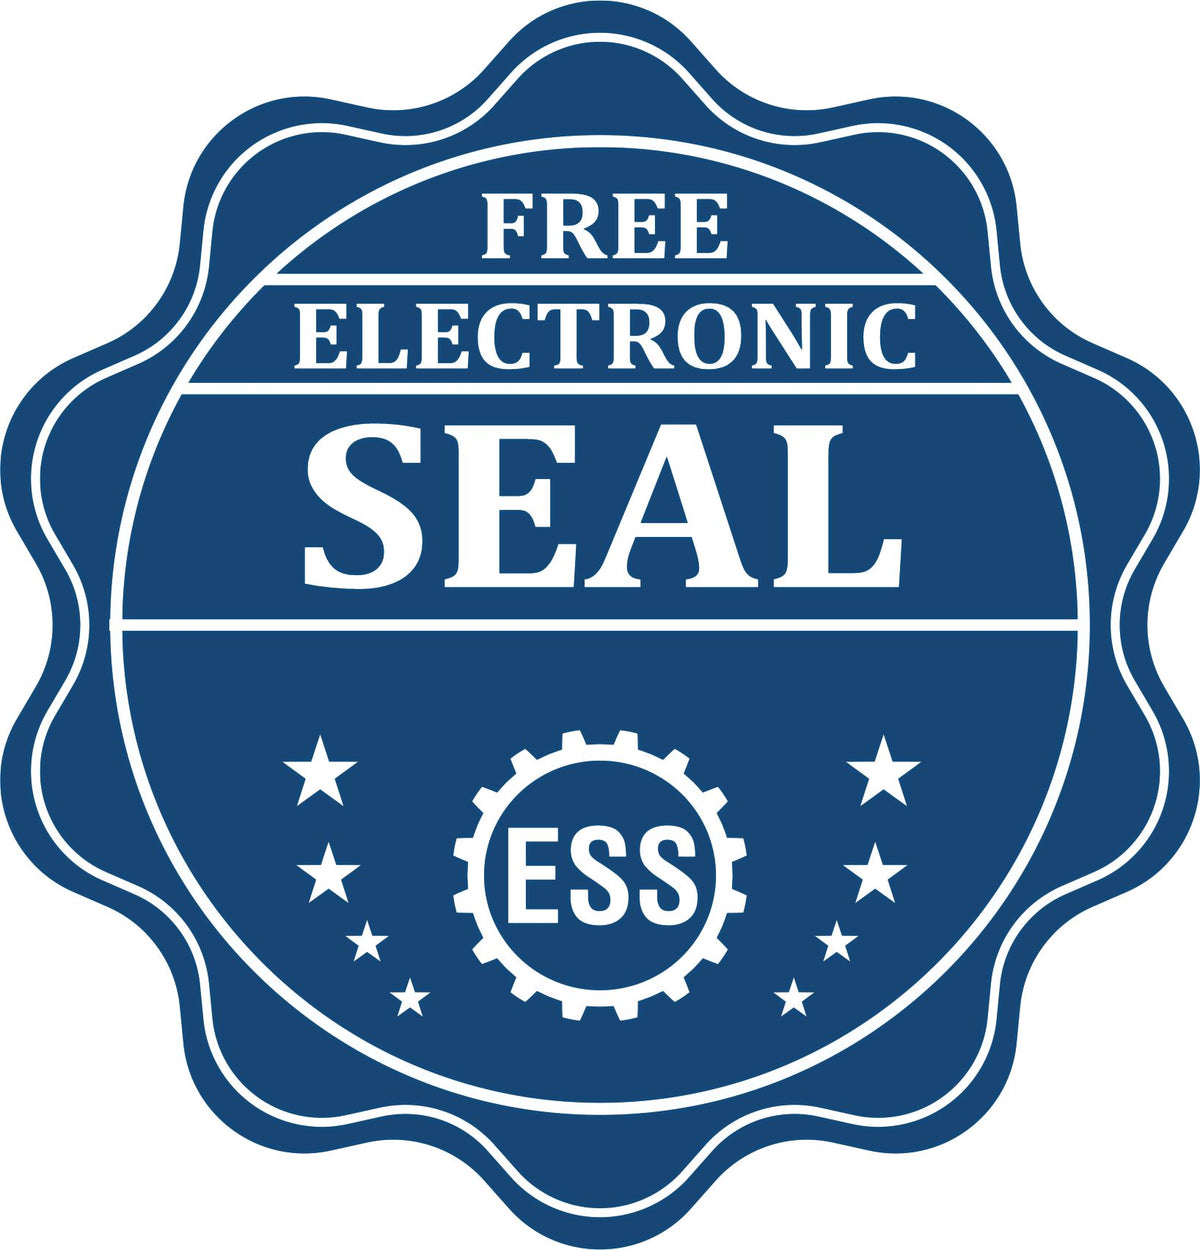 A badge showing a free electronic seal for the Massachusetts Engineer Desk Seal with stars and the ESS gear on the emblem.